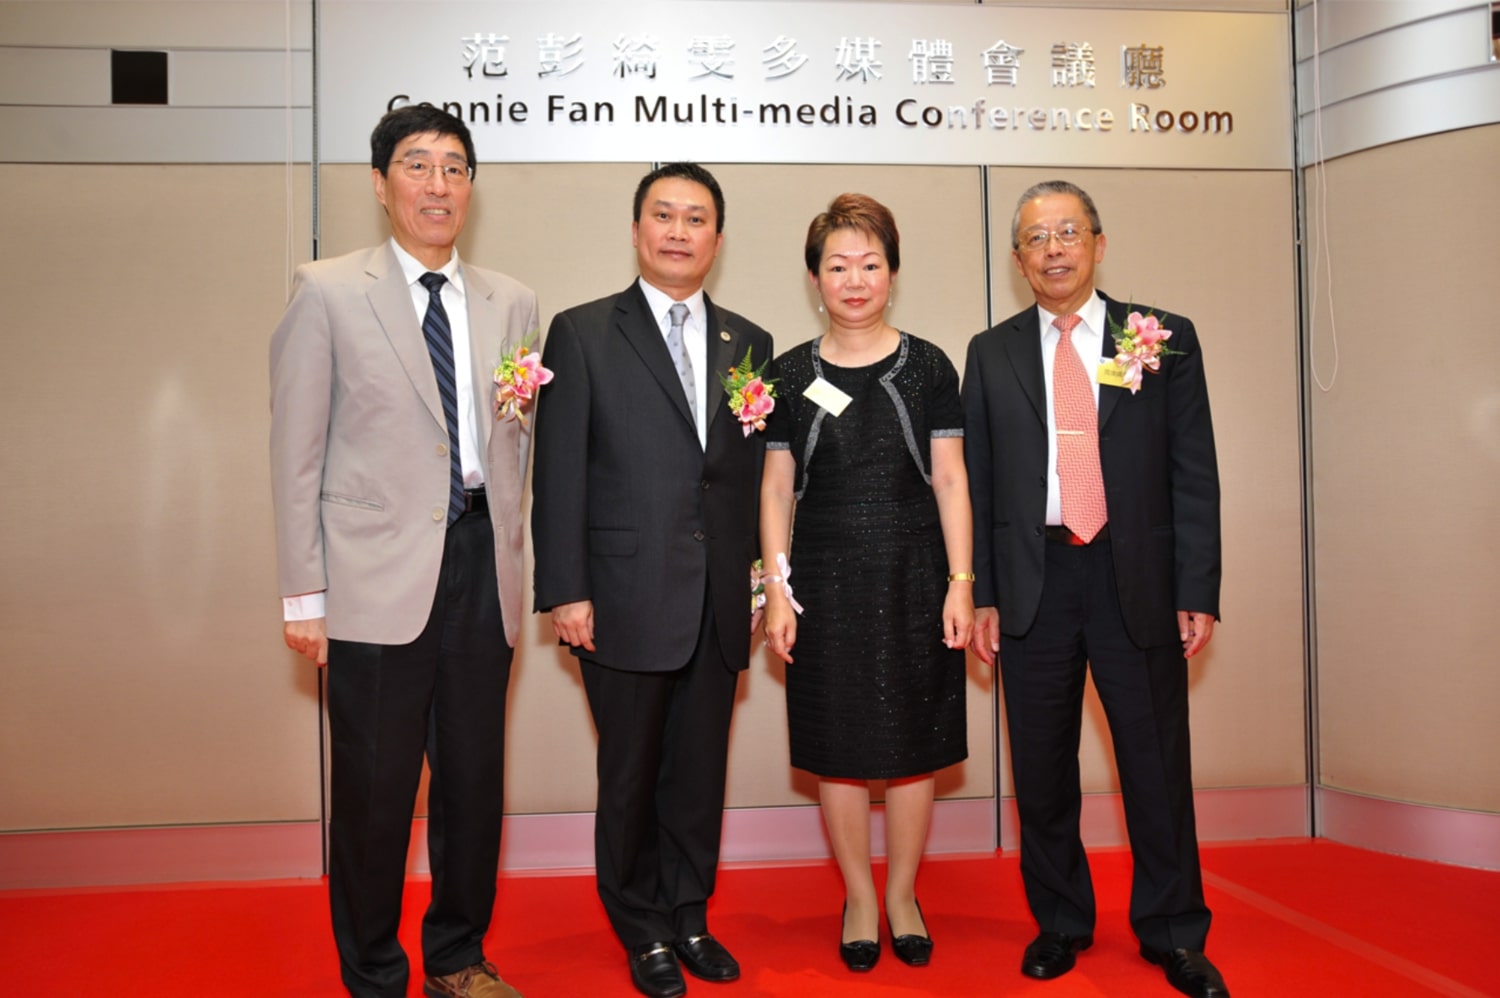 The Multi-Media Conference Room was renamed the Connie Fan Multi-media Conference Room in honour of Andrew Fan's mother in 2011